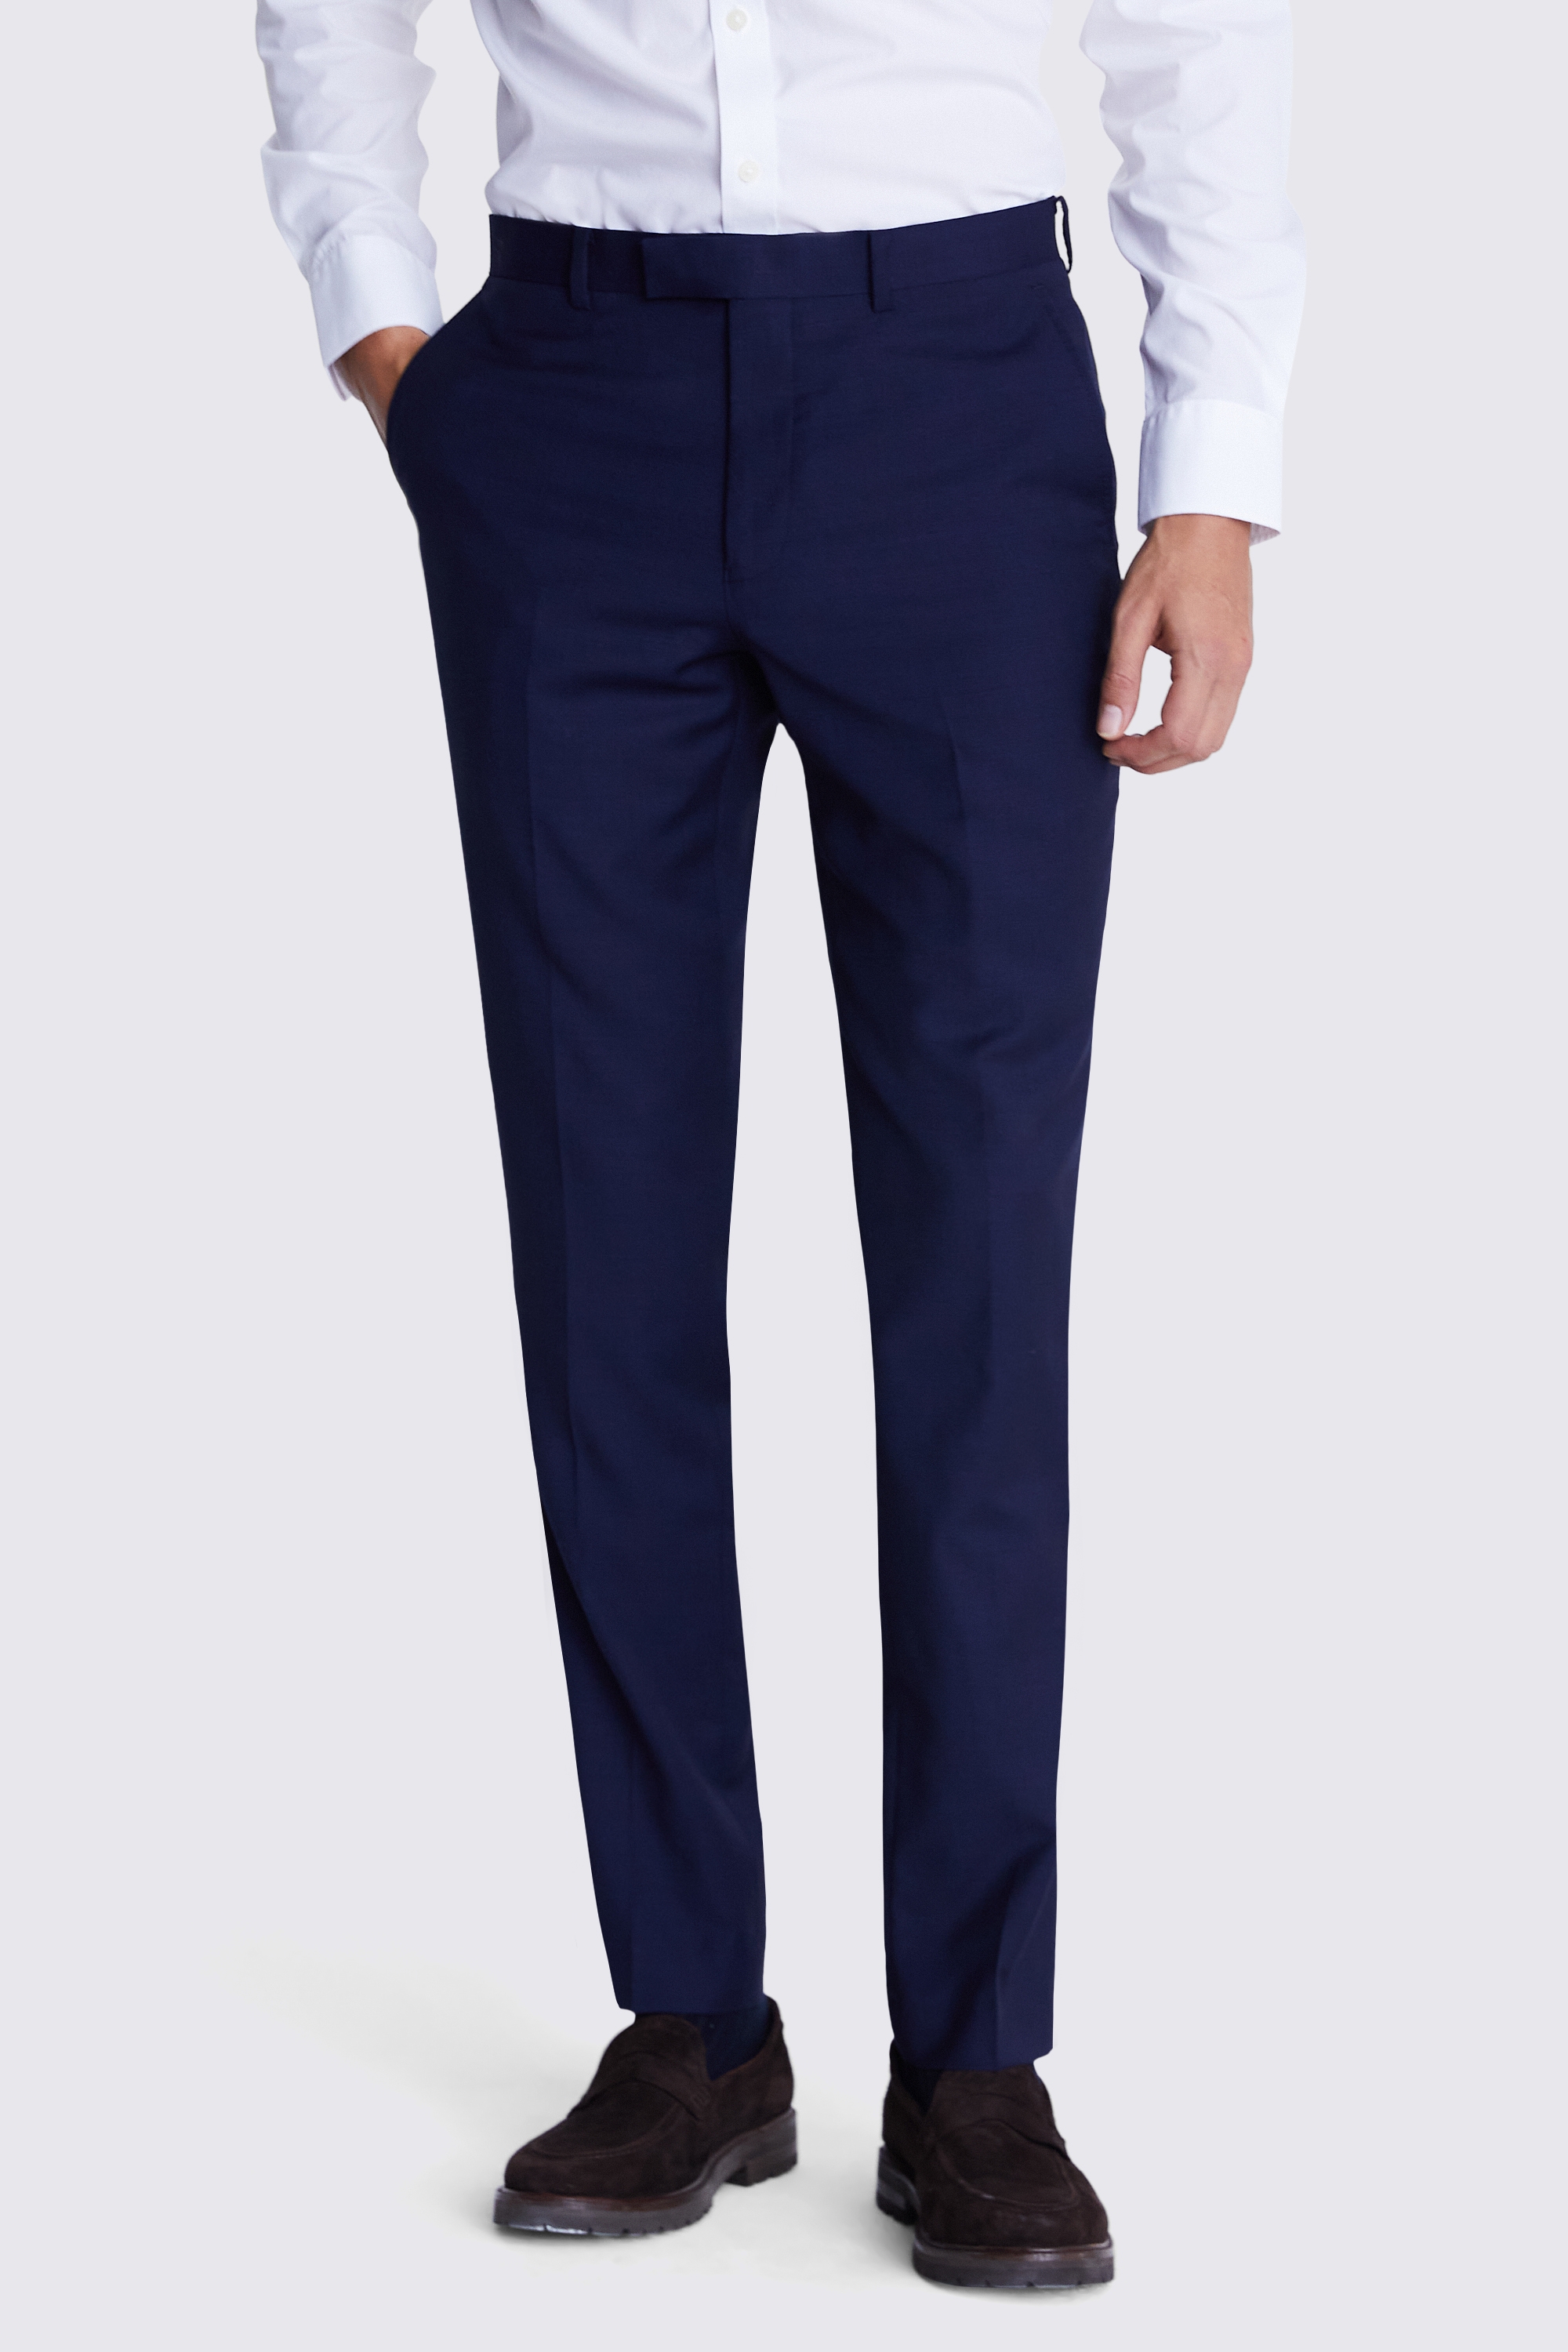 Tailored-Fit Navy Panama Trousers | Buy Online at Moss